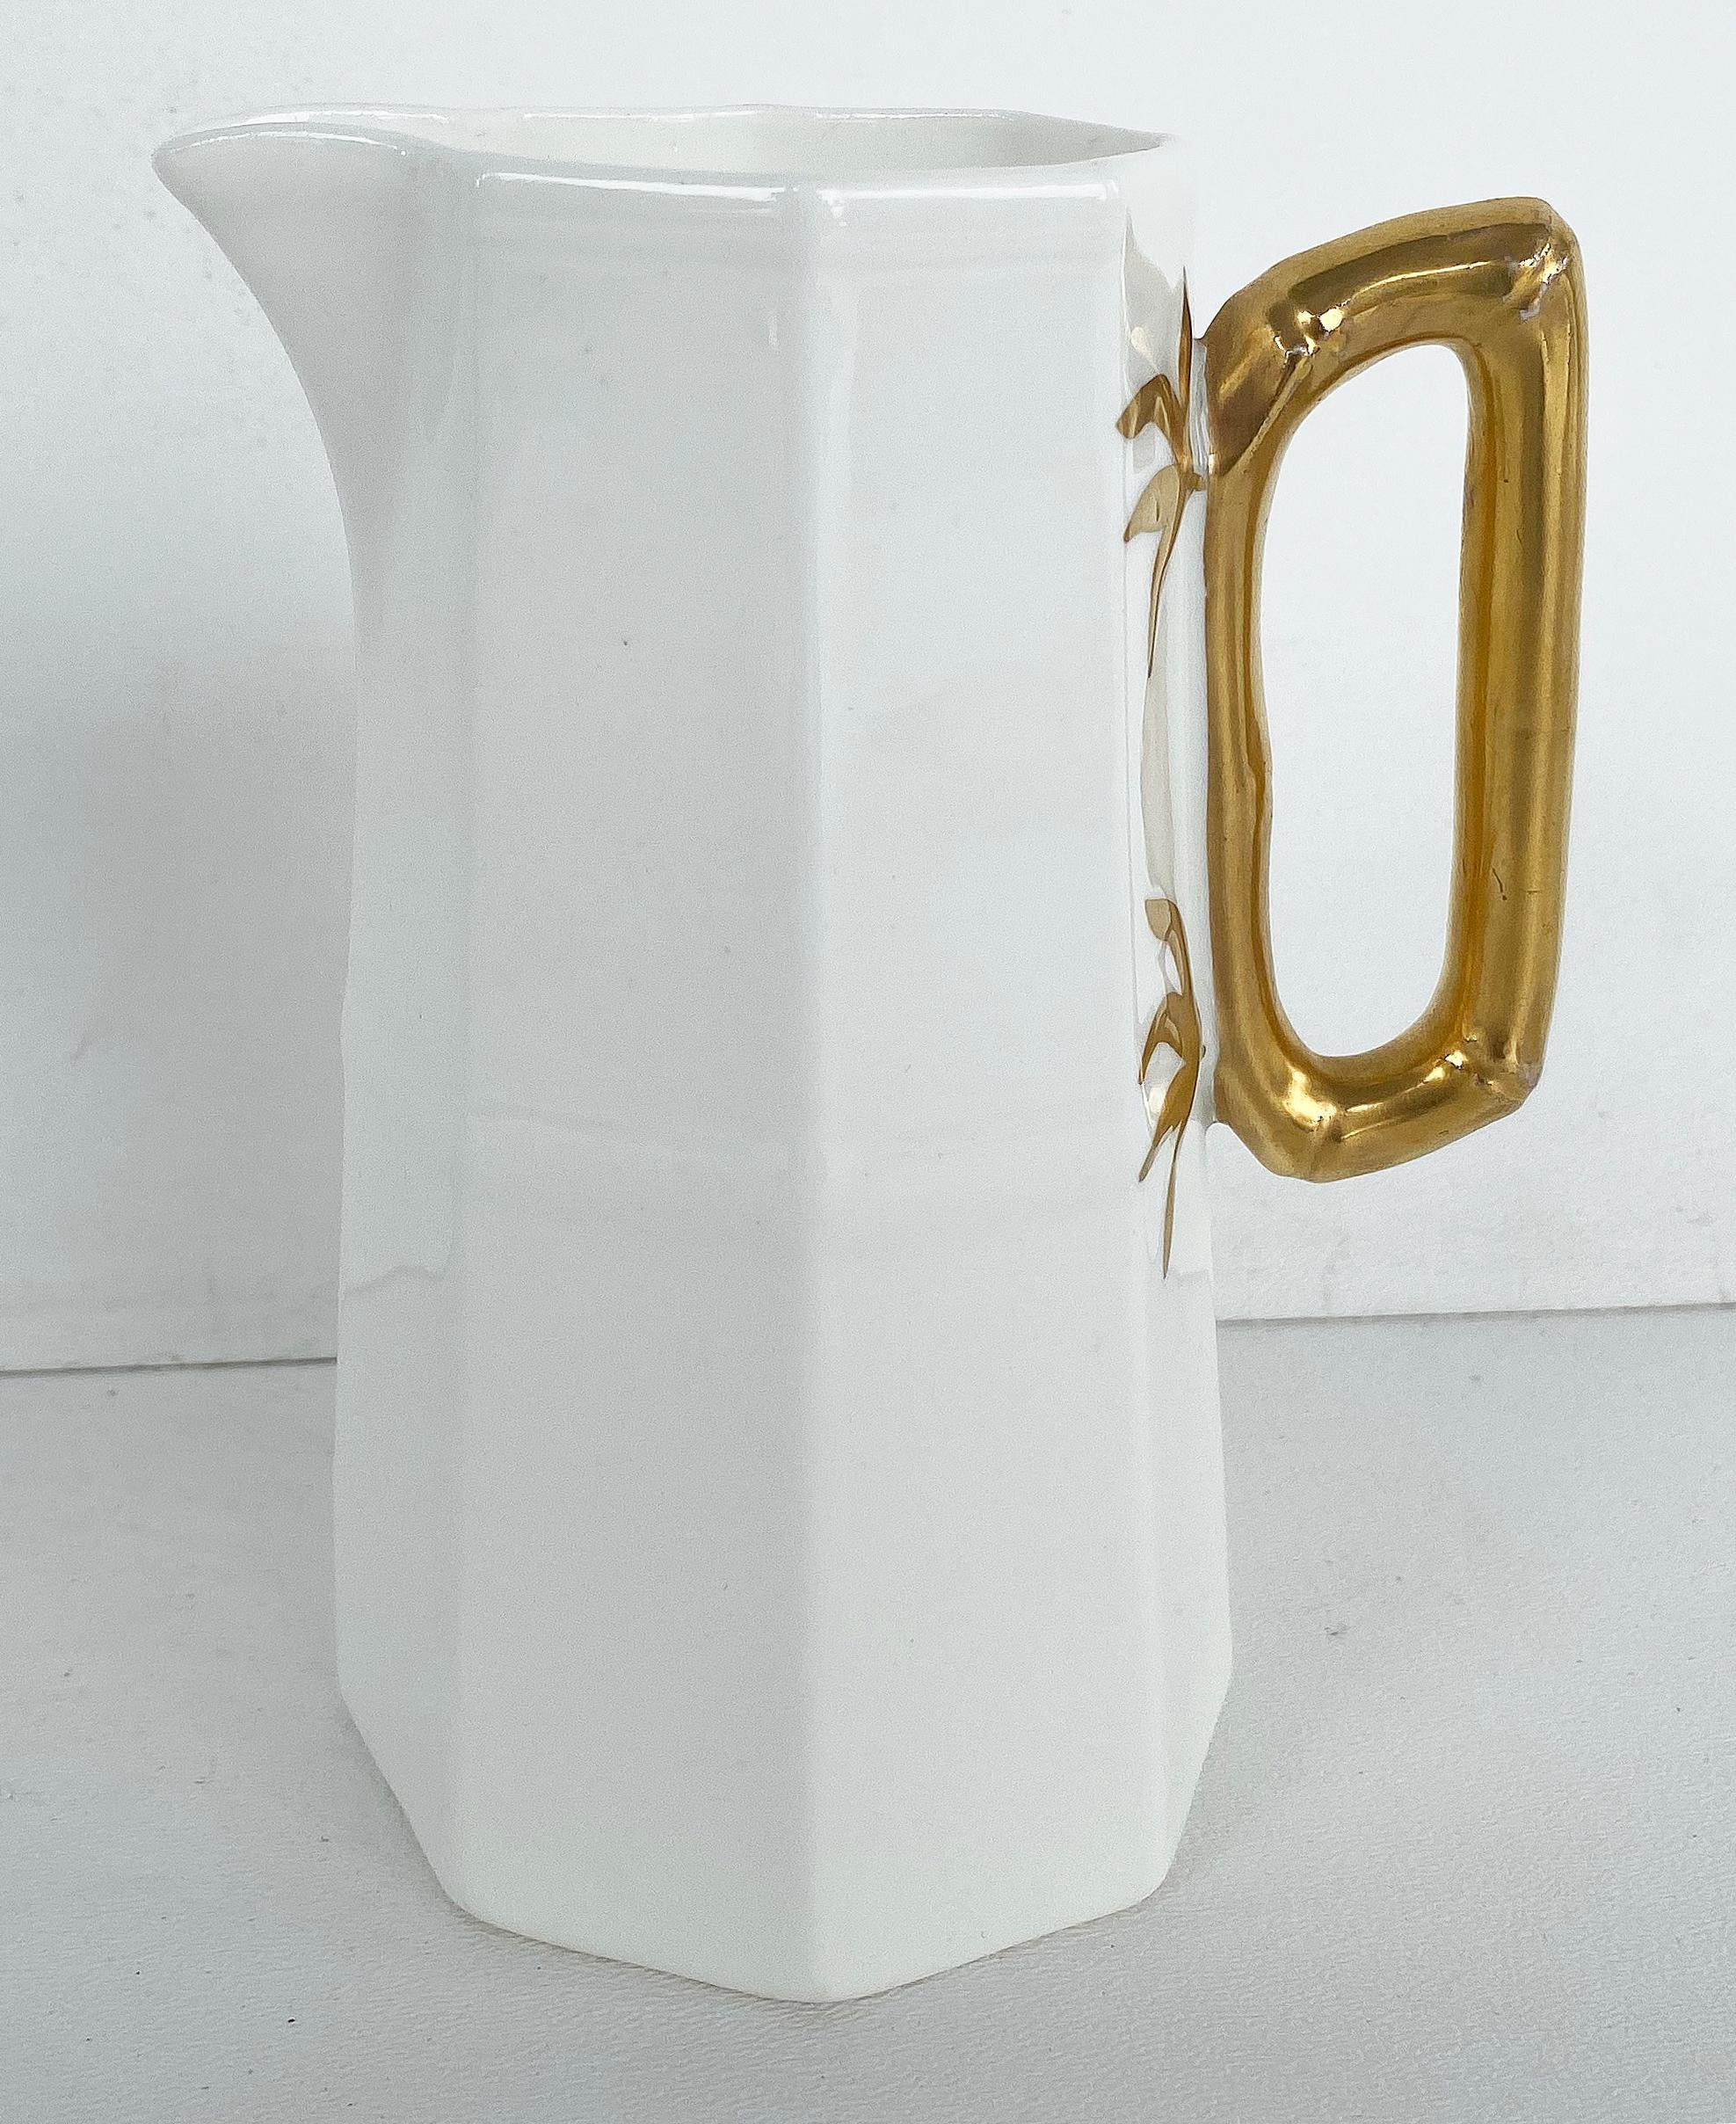 Antique Ironstone Porcelain Pitcher with Ornate Gilt Handle For Sale 2